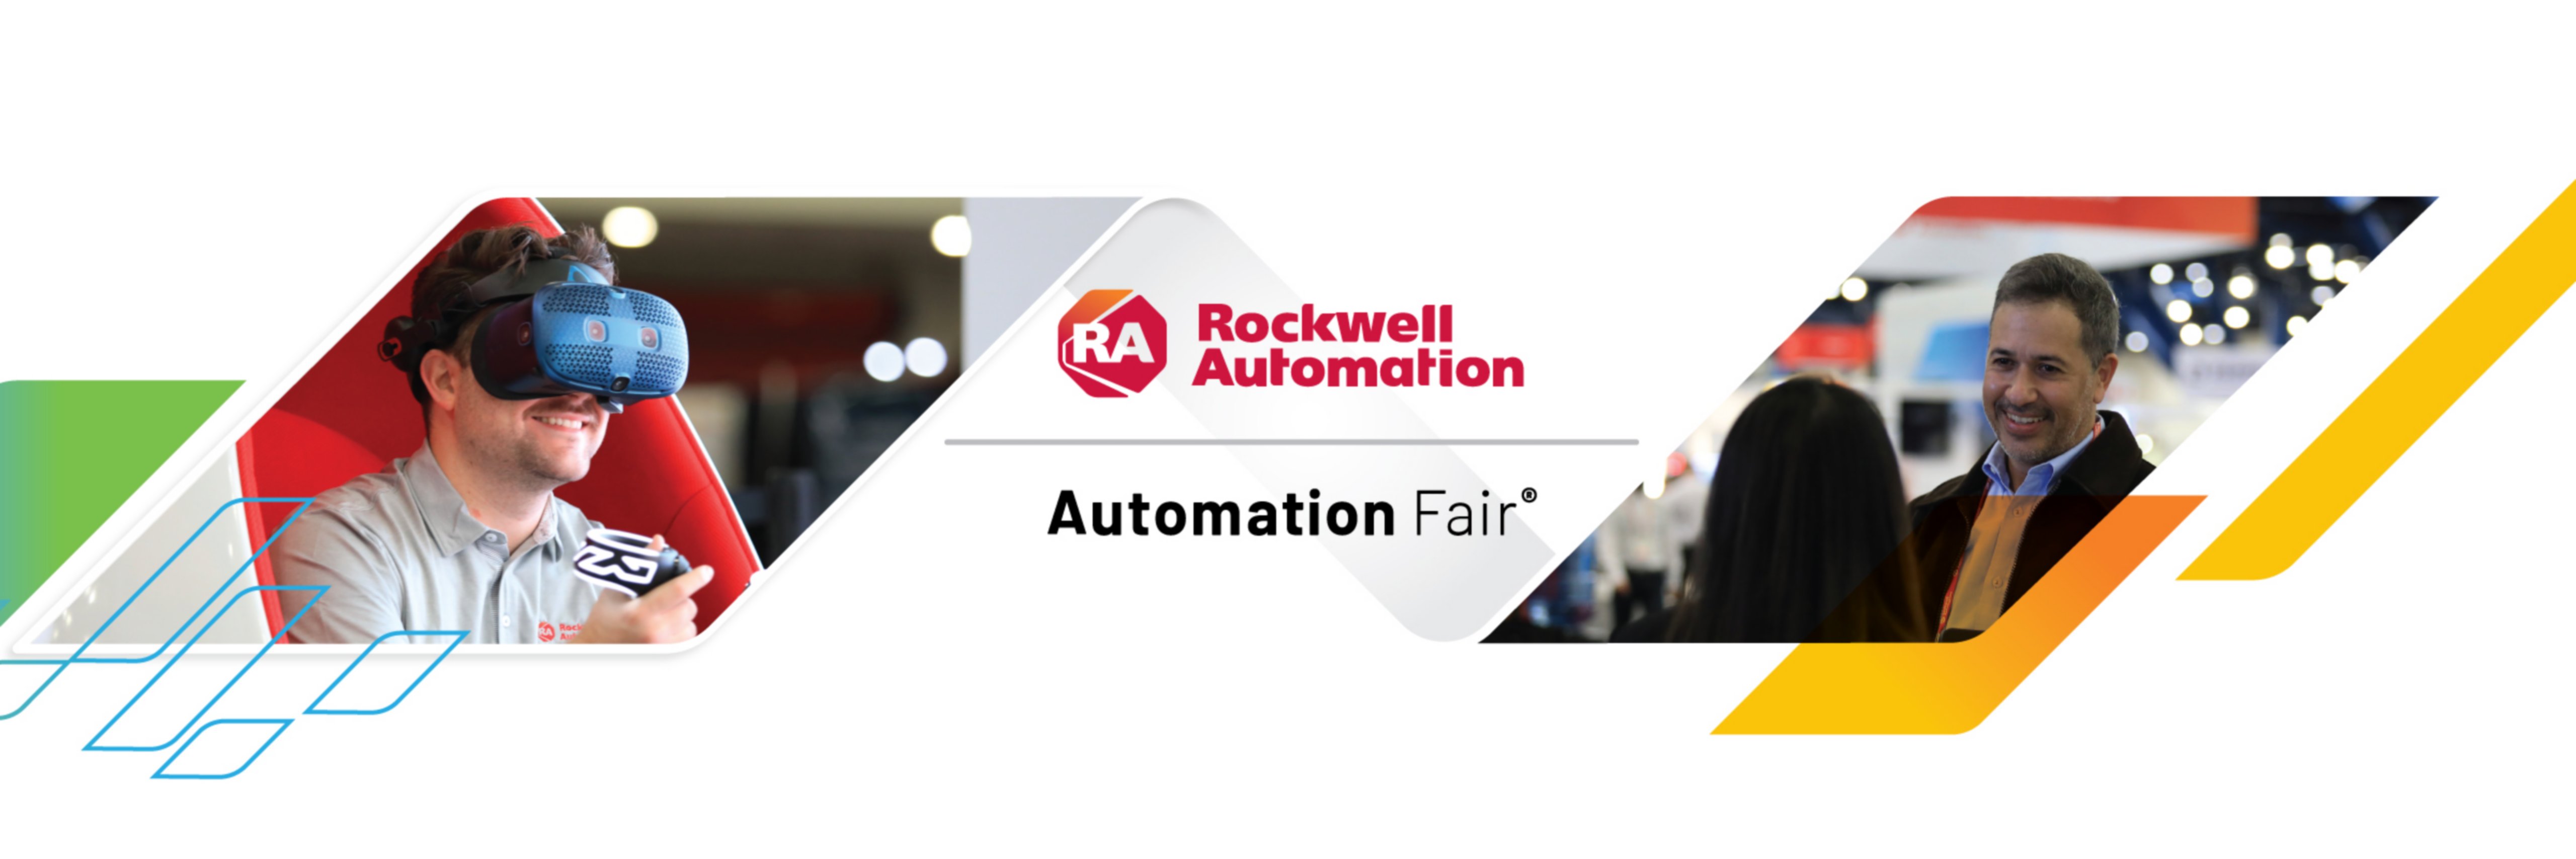 Automation Fair Event Rockwell Automation